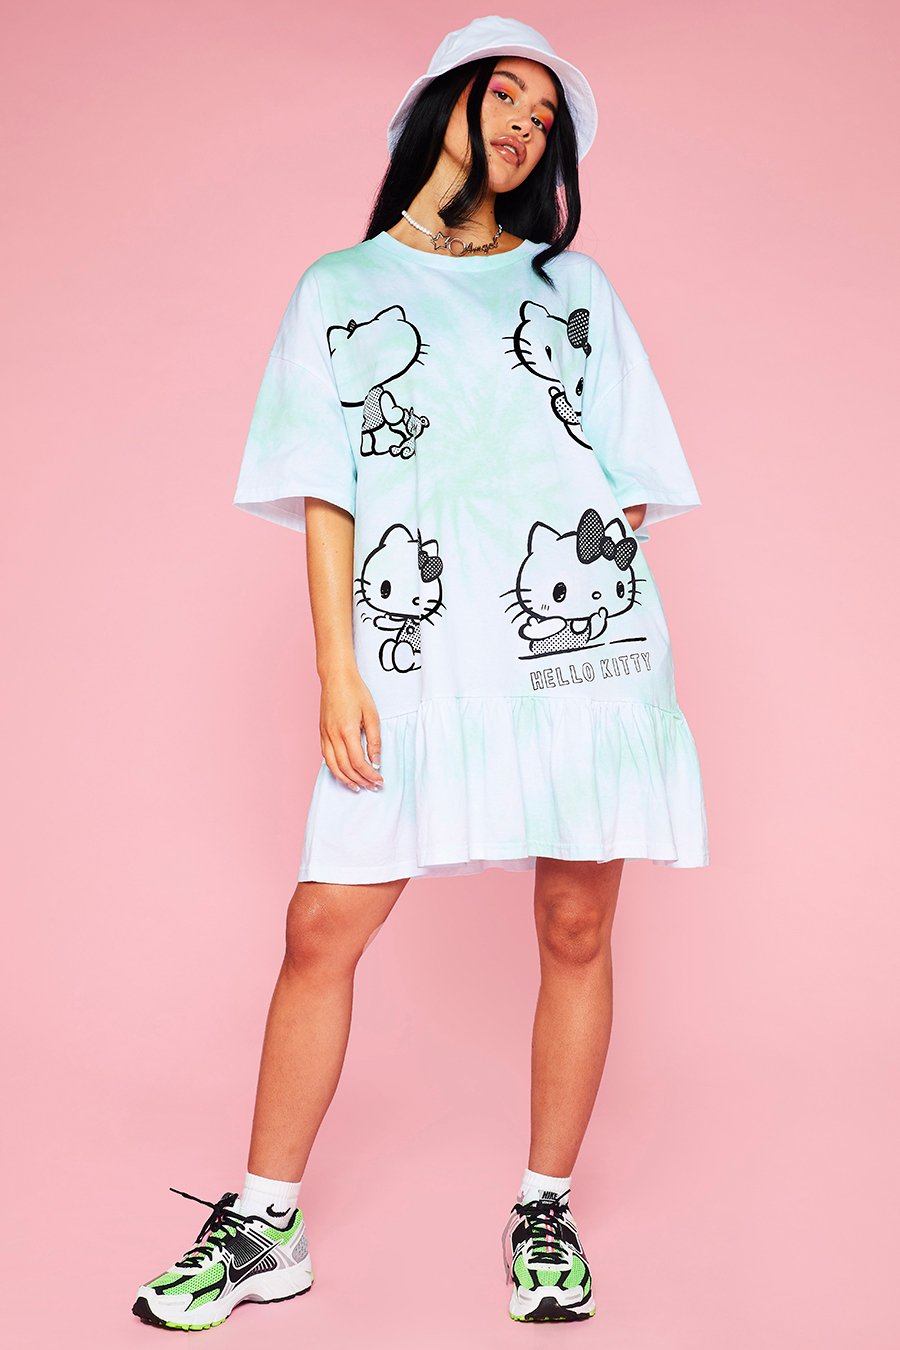 HELLO KITTY TIE DYE FRILL TSHIRT DRESS - EXCLUSIVE Dresses from NGO - Just $35.00! SHOP NOW AT IAMINHATELOVE BOTH IN STORE FOR CYPRUS AND ONLINE WORLDWIDE